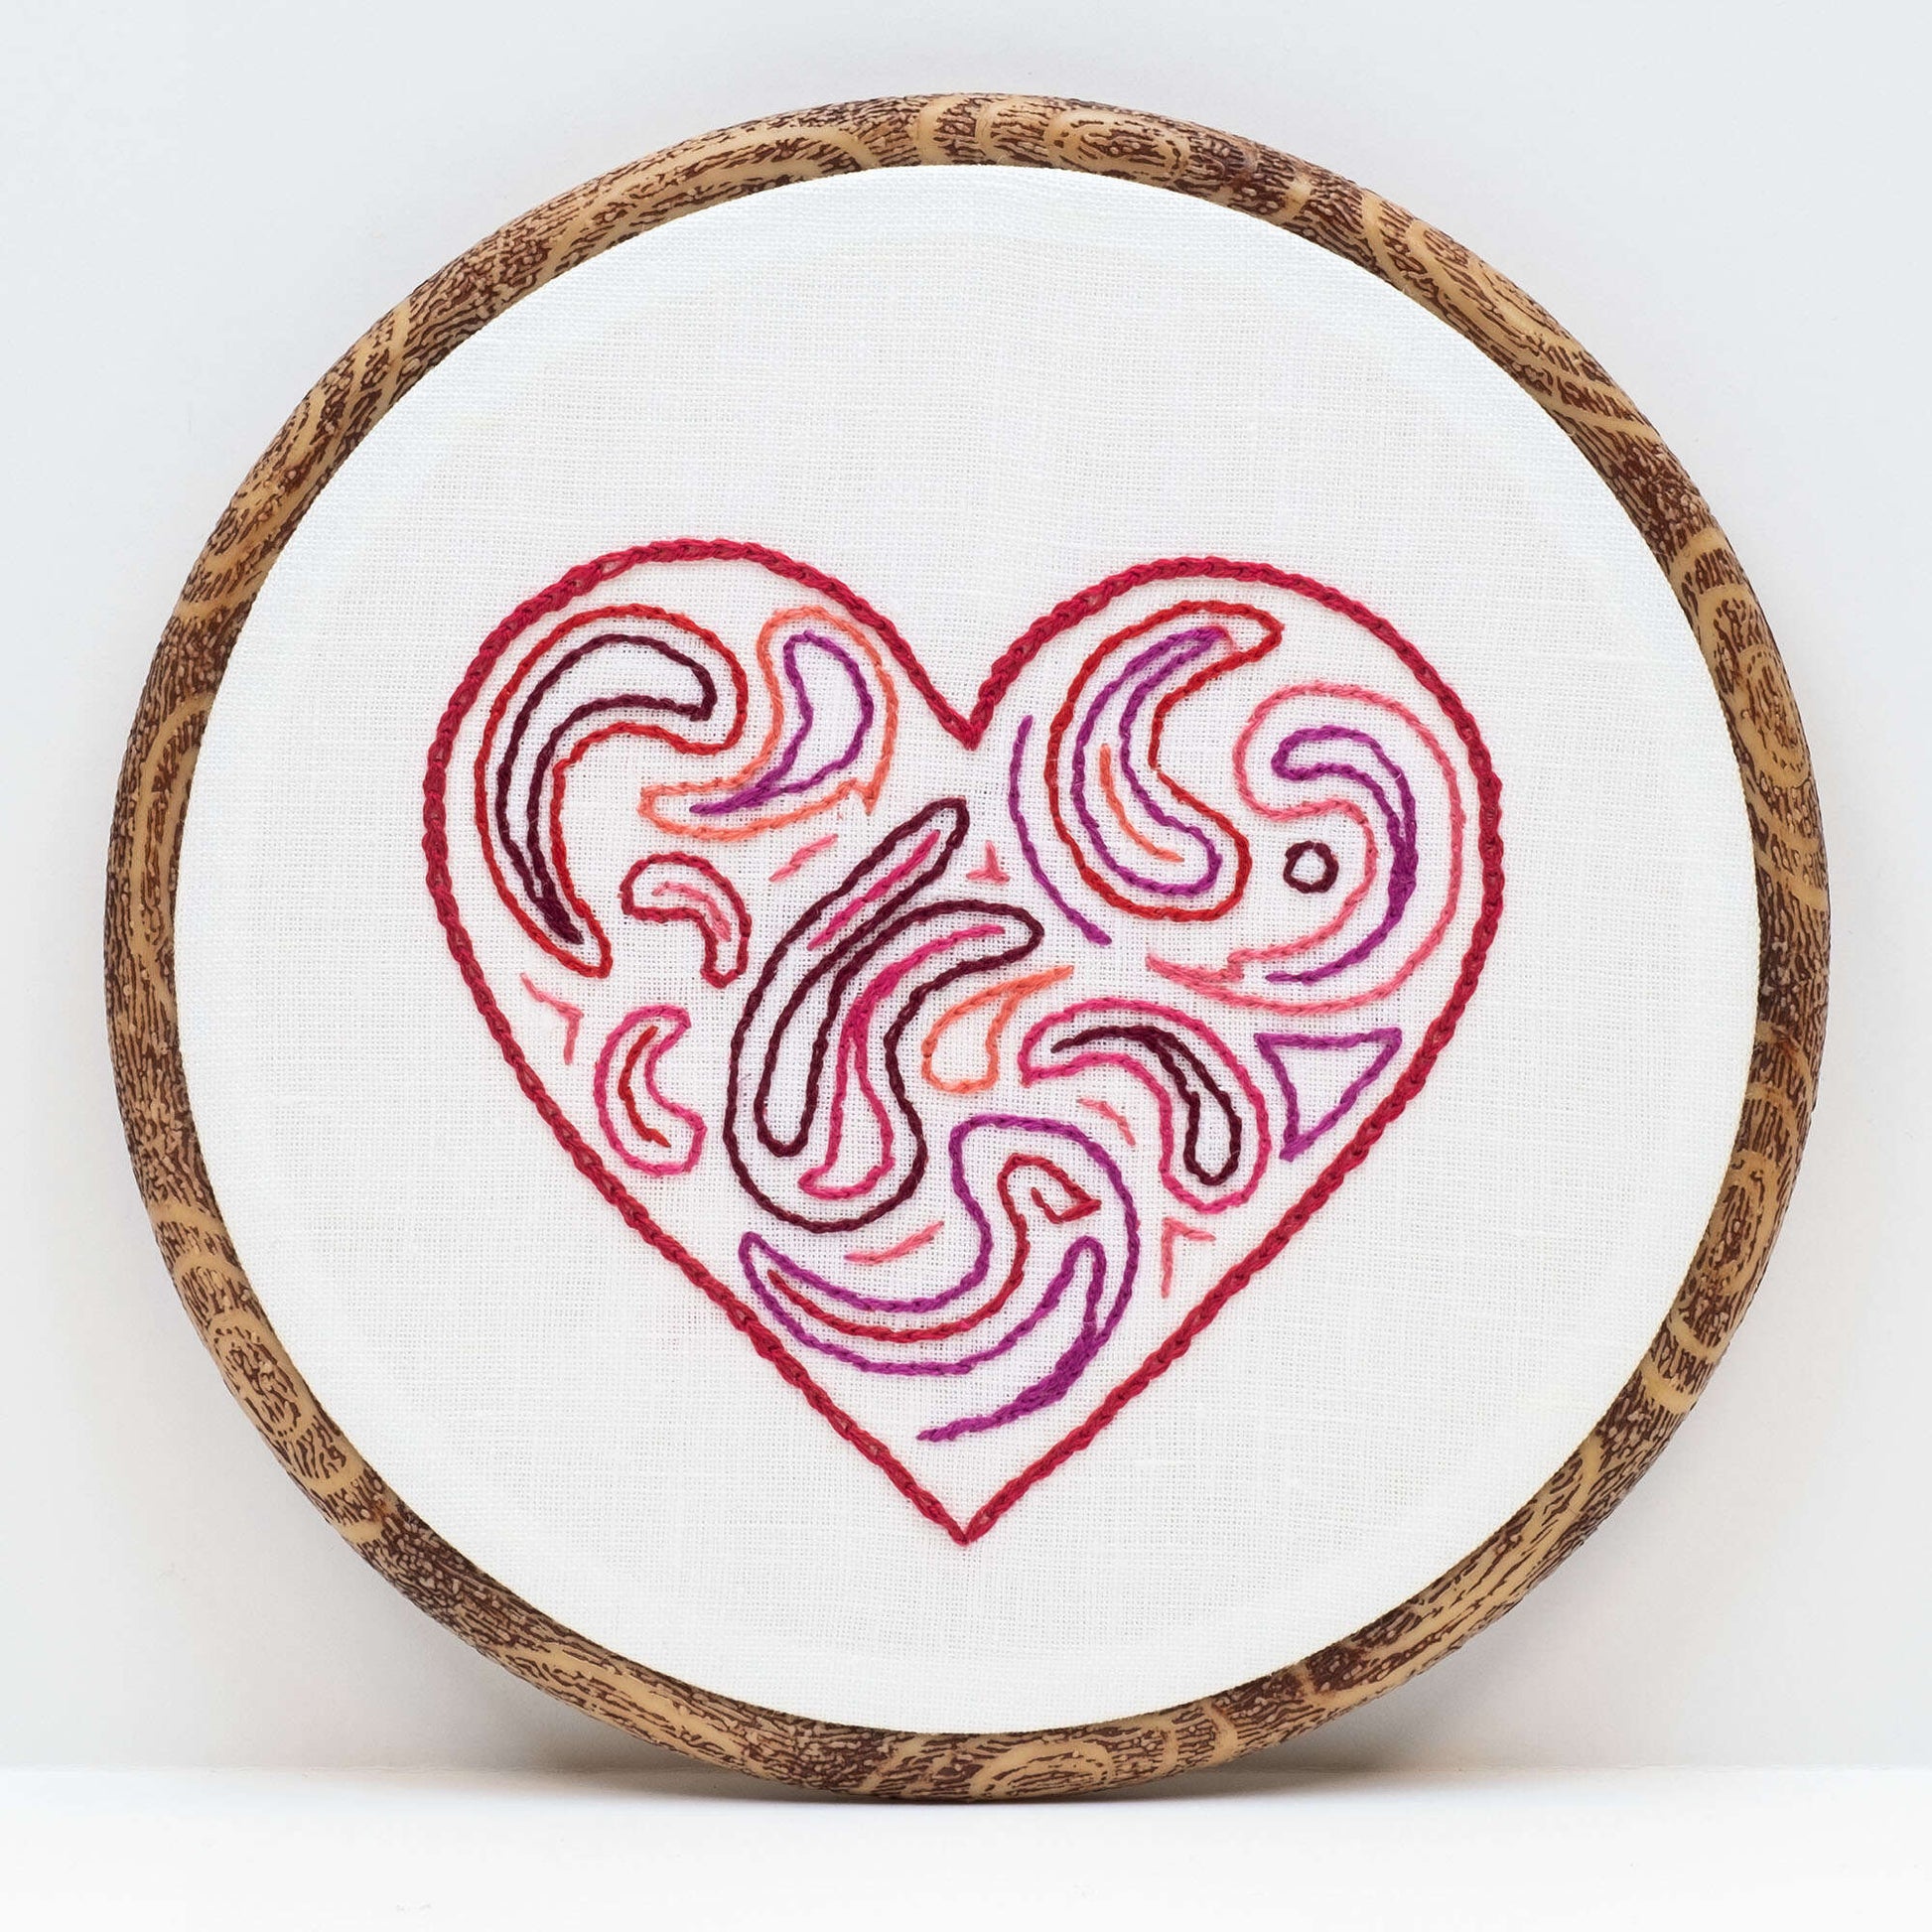 Anchor Swirling Heart Embroidery Design Pattern